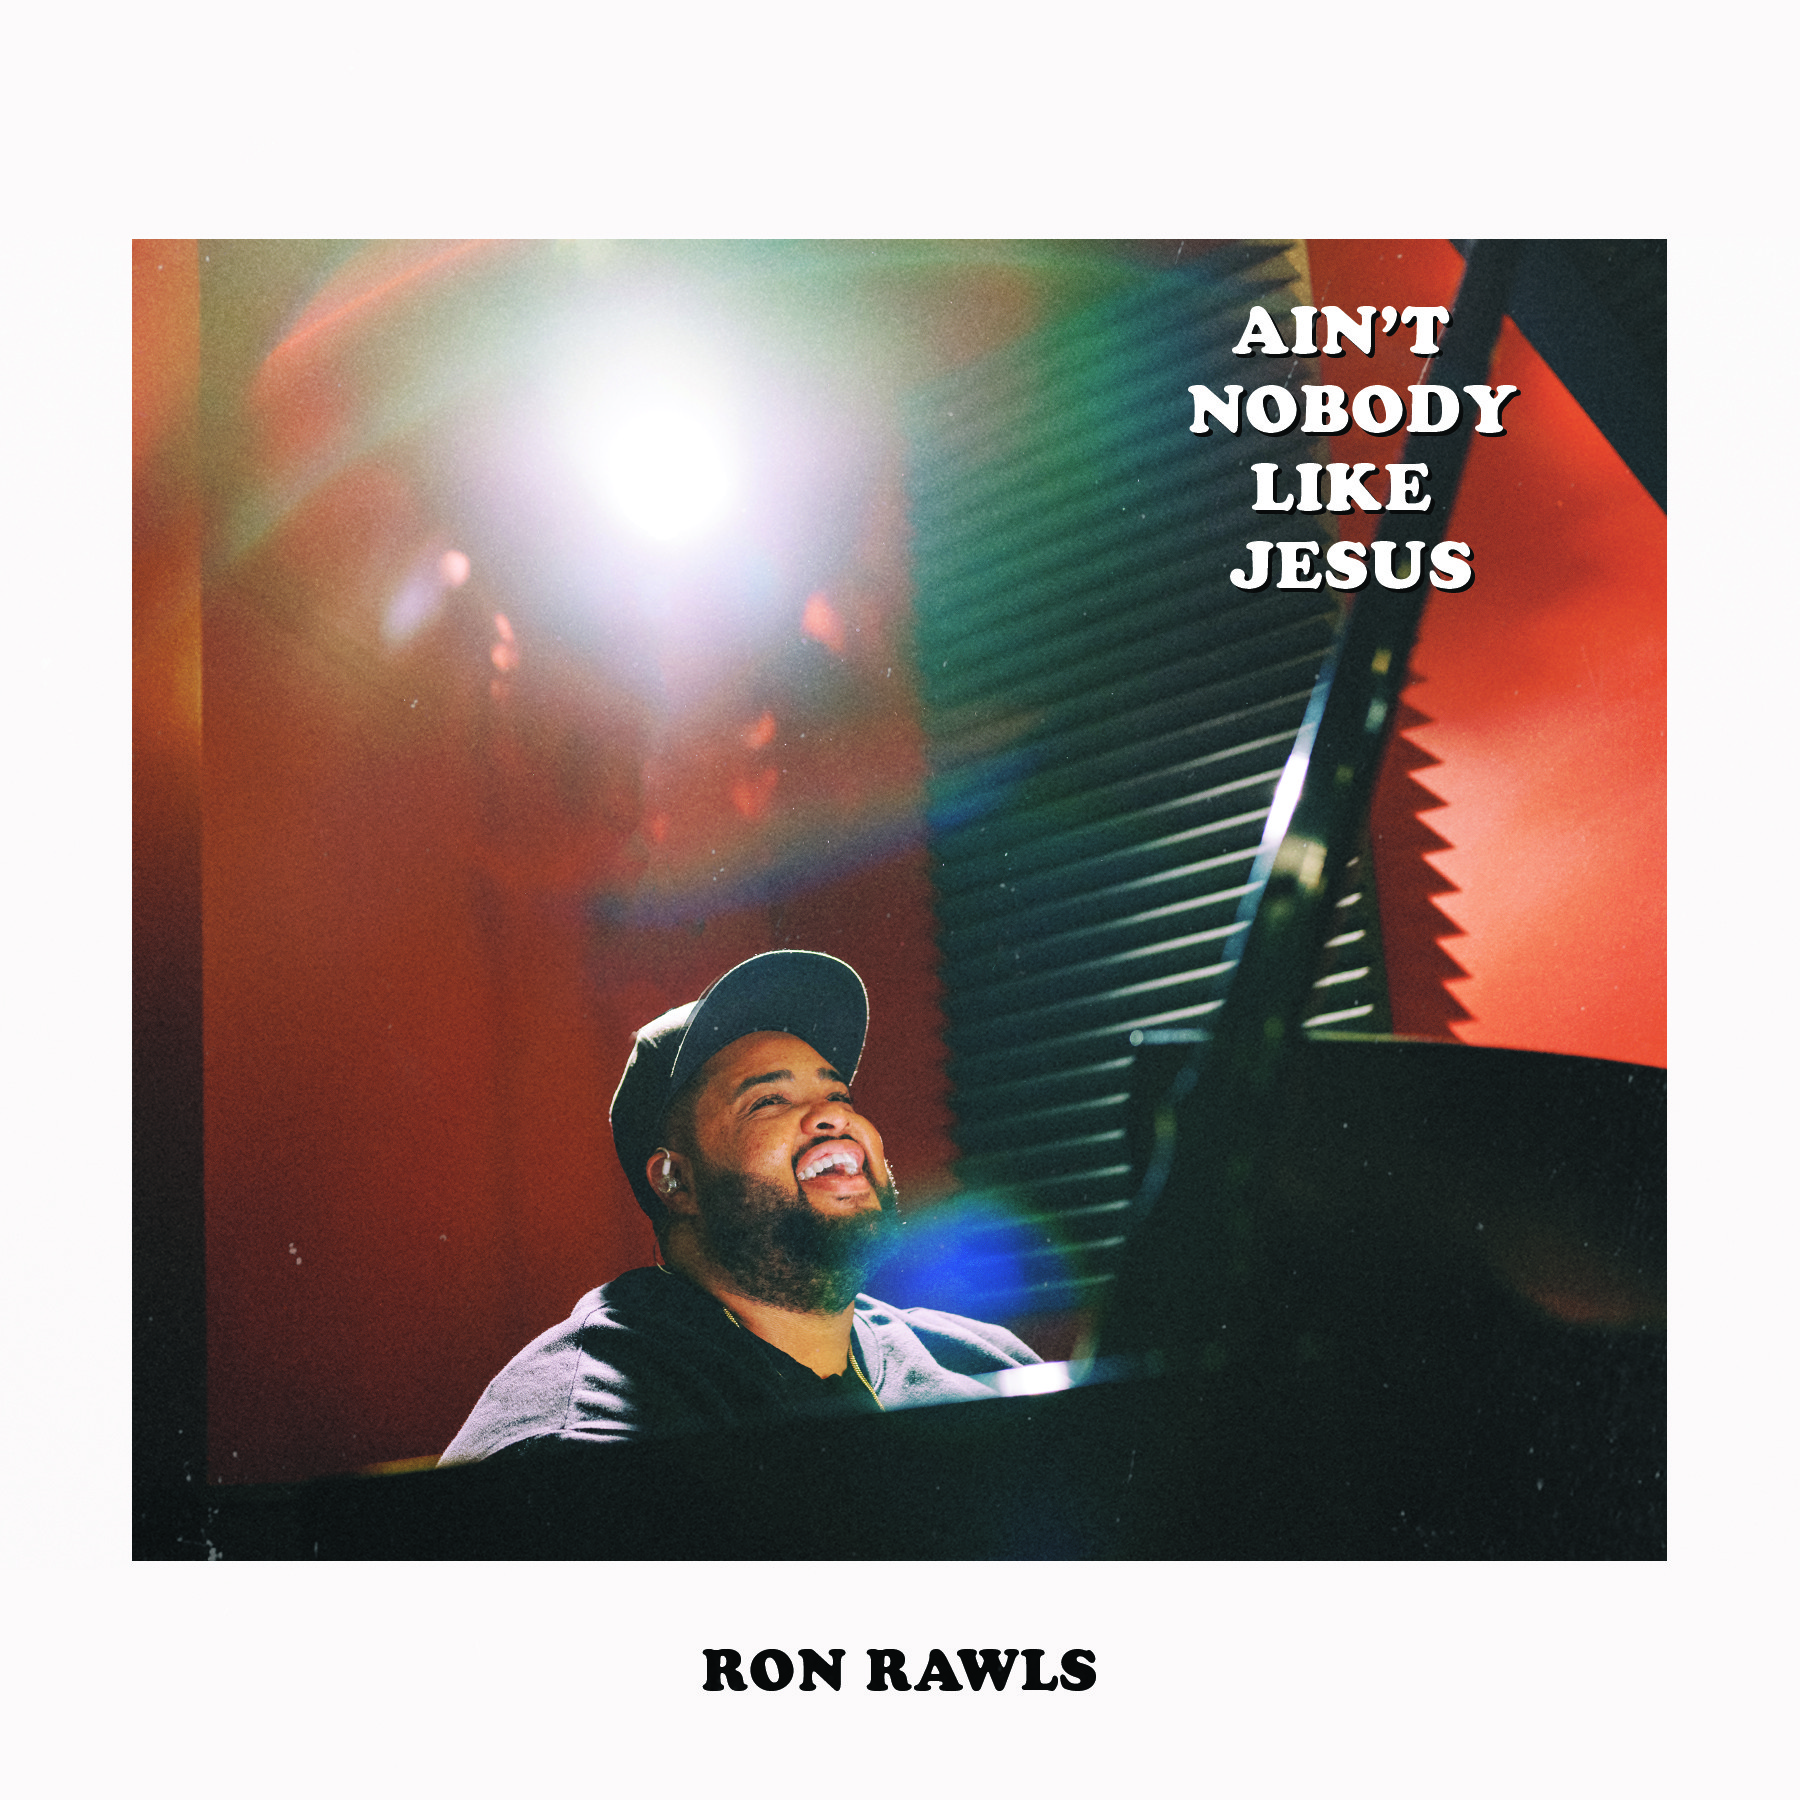 MANDISA’S MUSICAL DIRECTOR RON RAWLS RELEASES NEW PROJECT